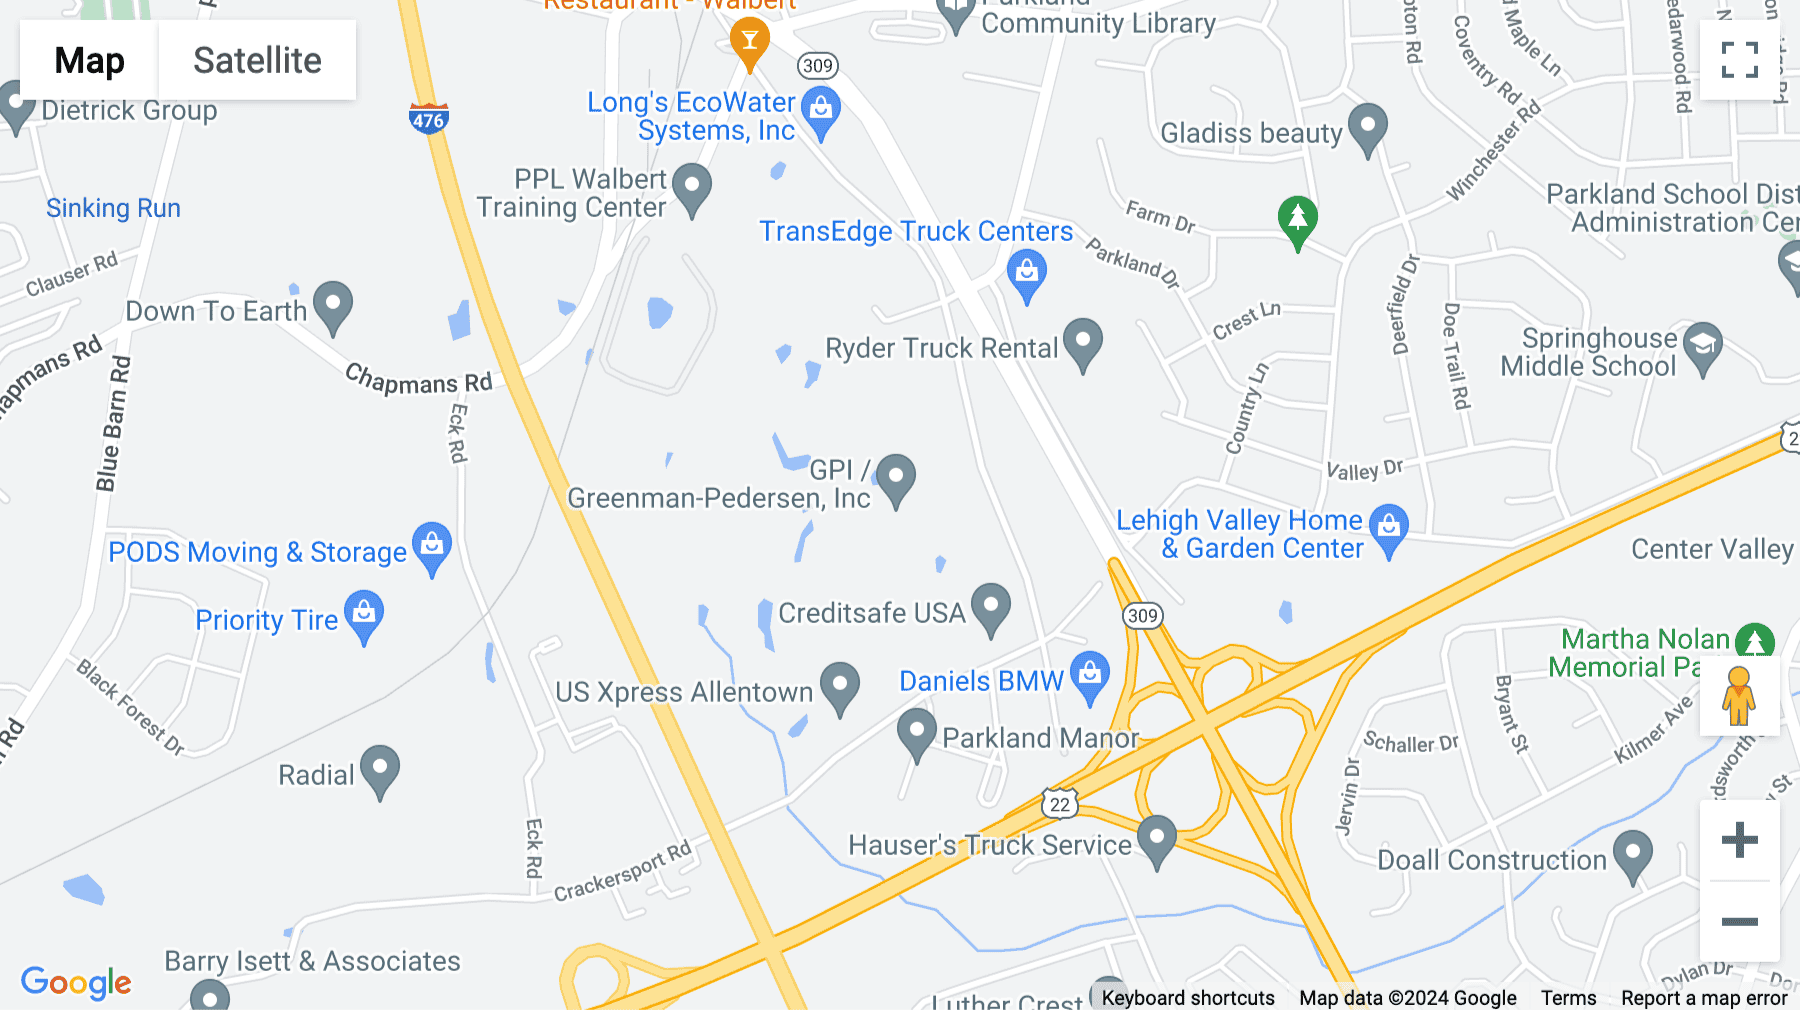 Click for interative map of 1320 Hausman Road, Suite 200, Allentown